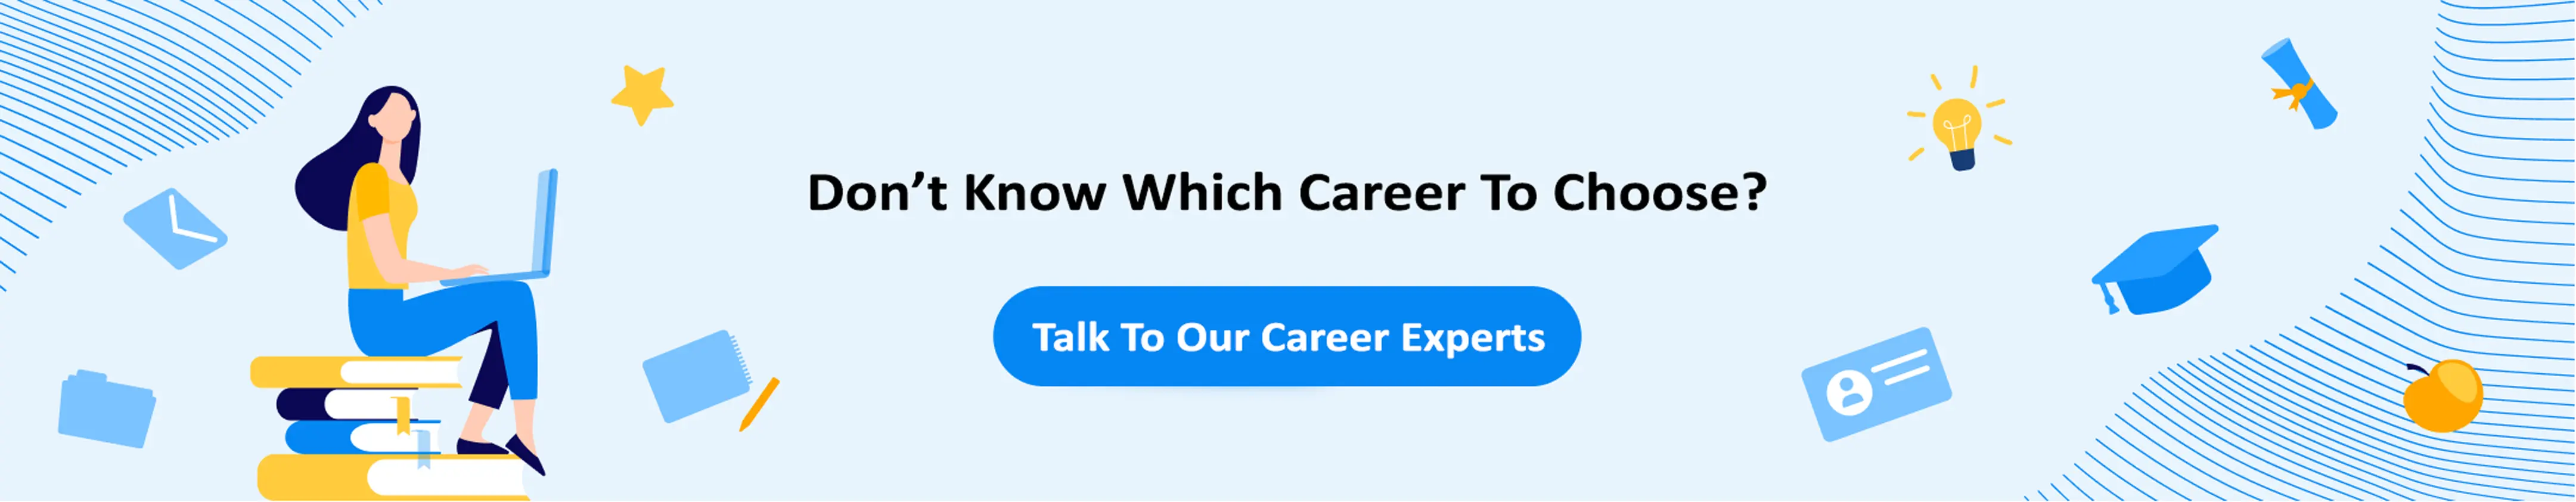 Talk-to-experts